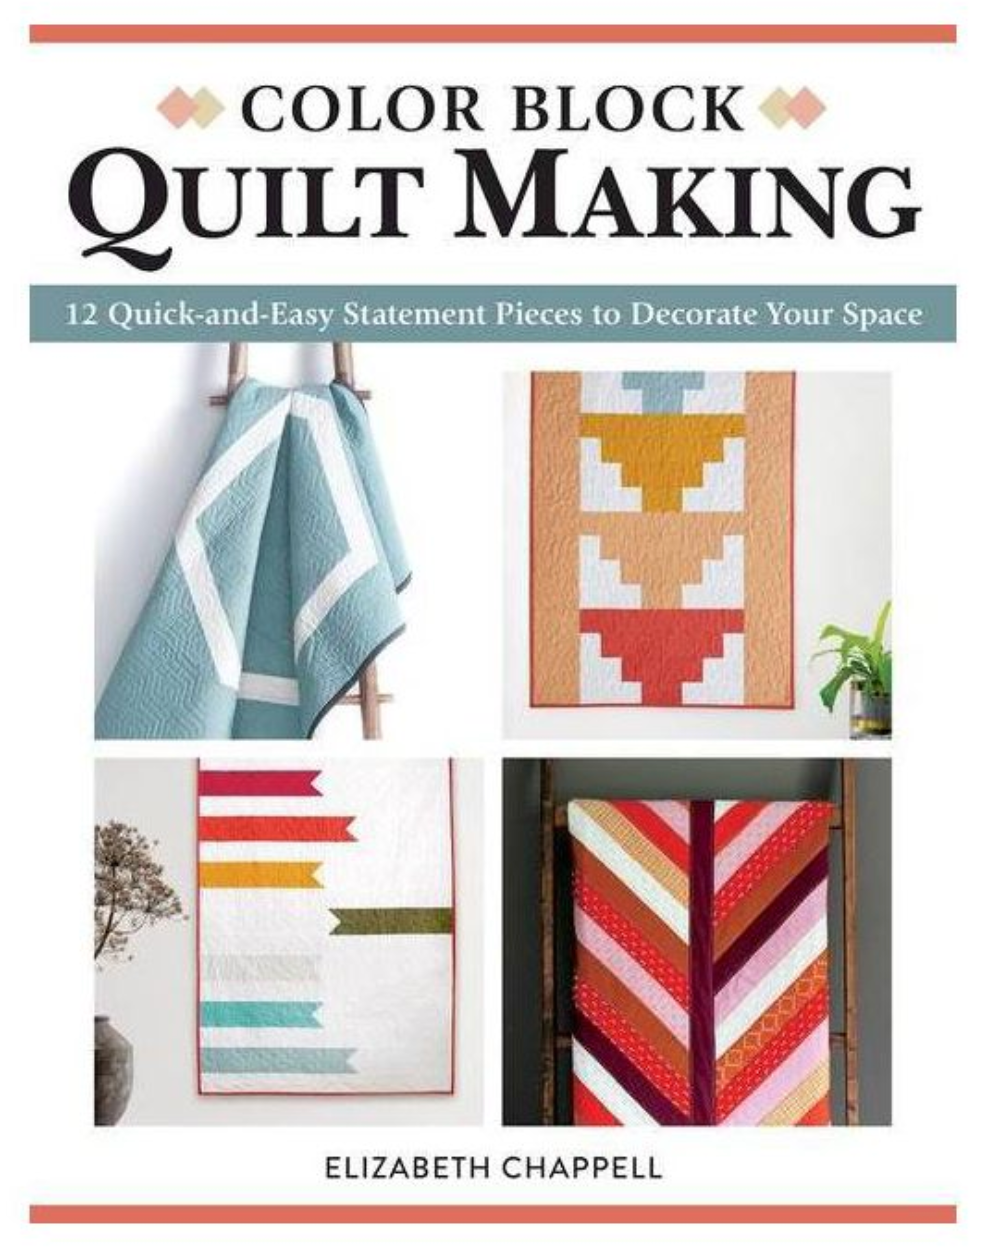 BOOK - Signed Color Block Quilt Making